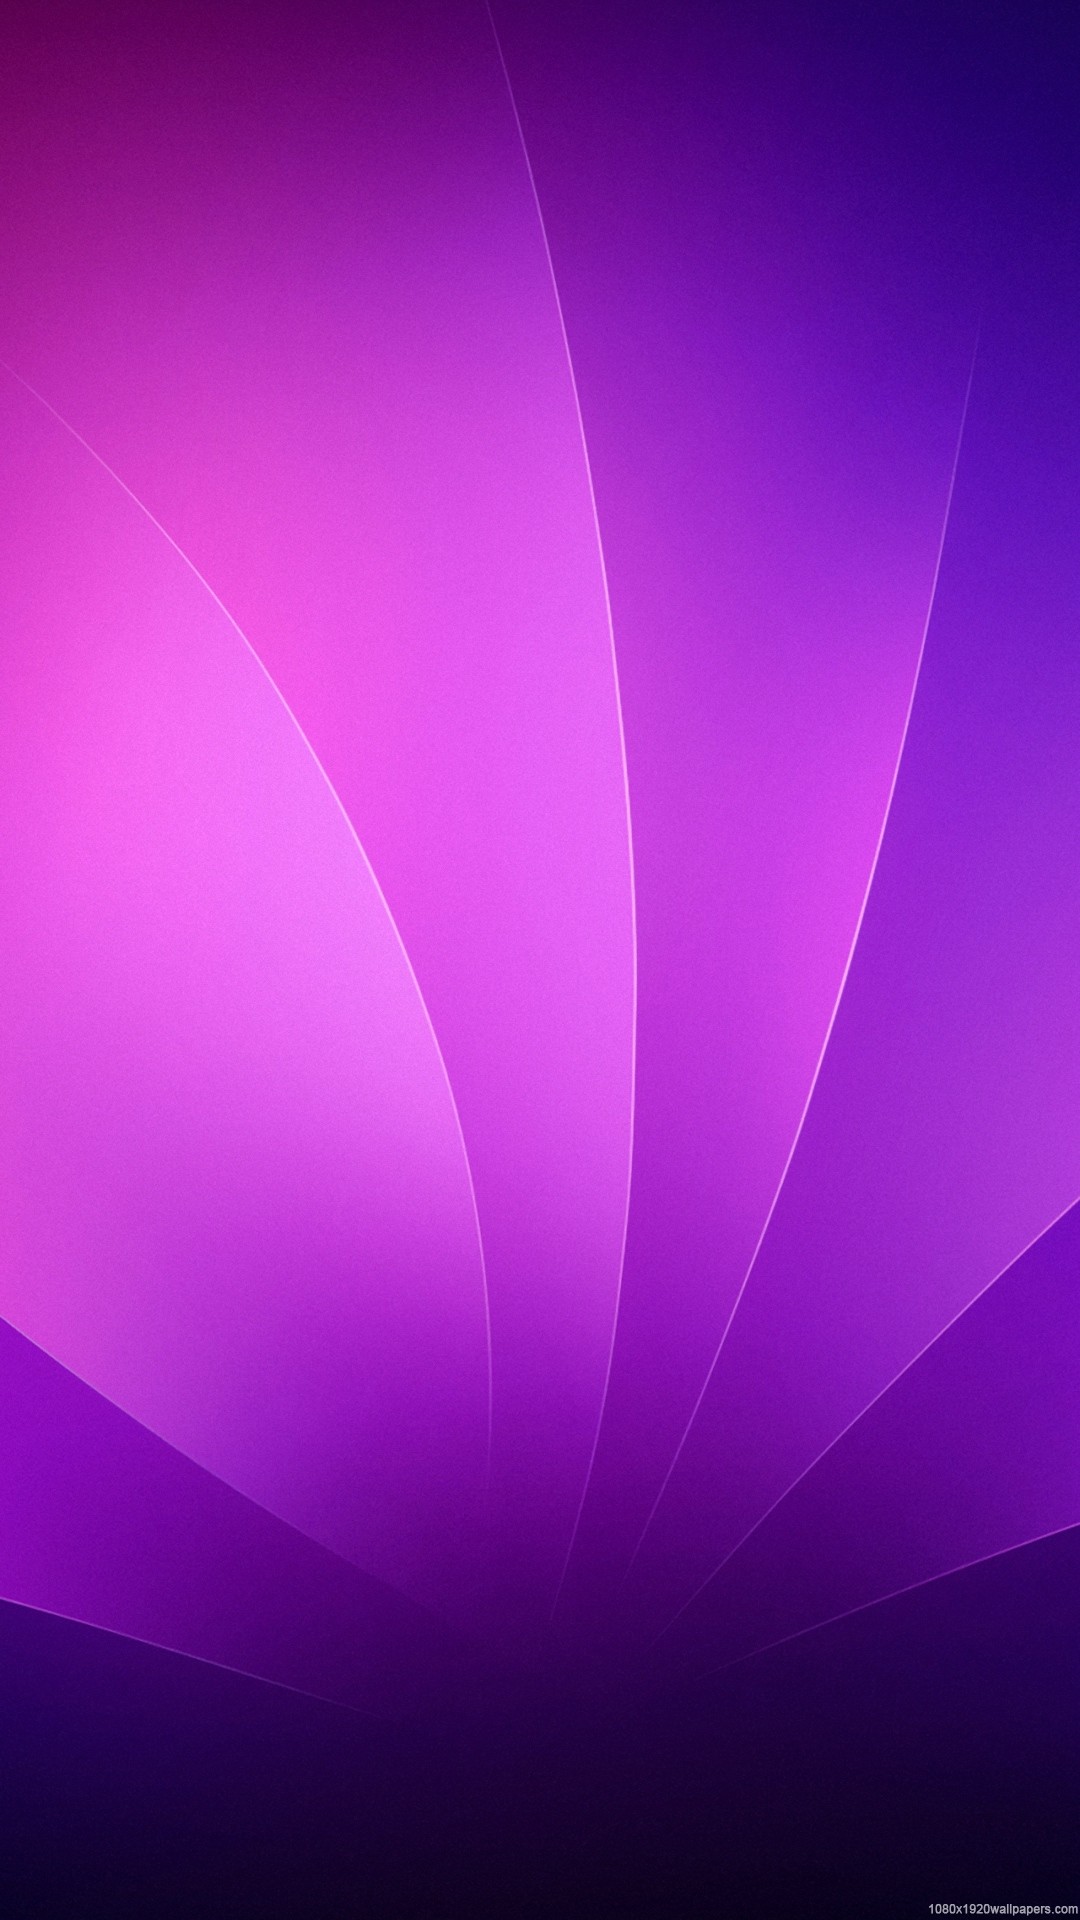 1080x1920 awesome hd abstract purple